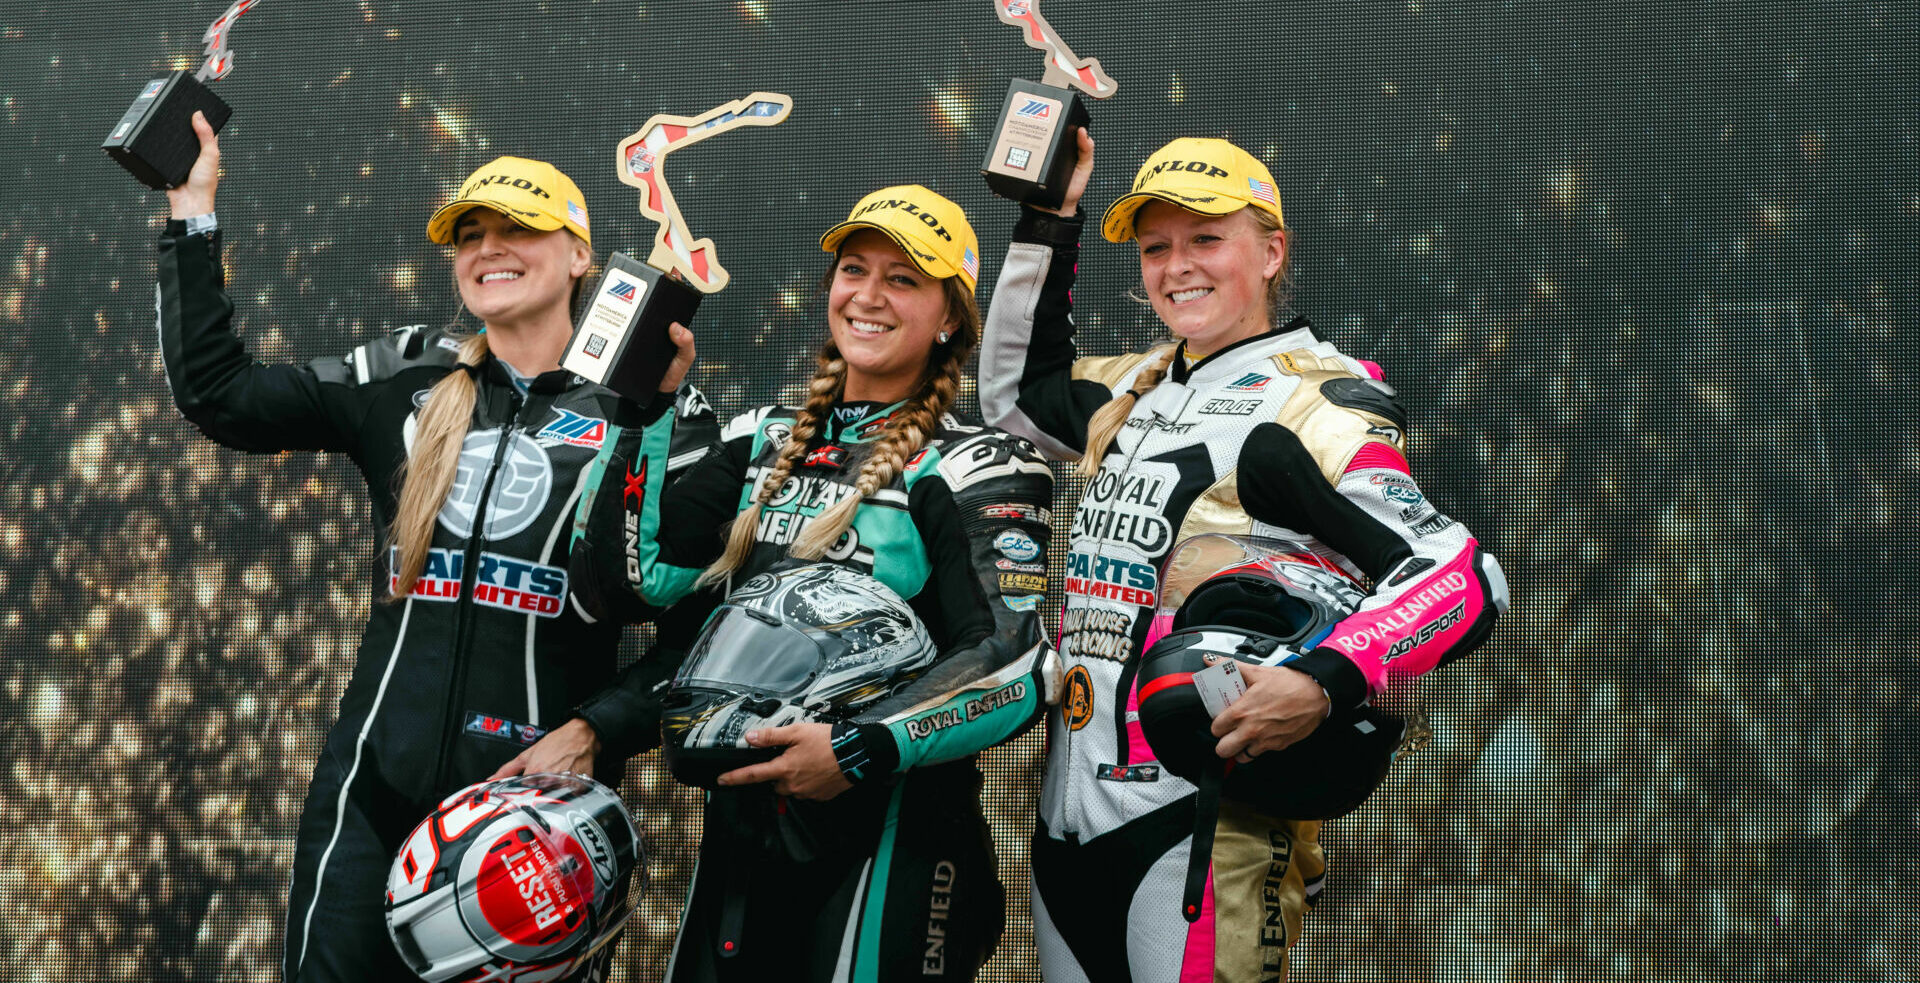 Royal Enfield Build. Train. Race. winner Kayleigh Buyck (center), runner-up Crystal Martinez (left), and third-place finisher Chloe Peterson (right) on the podium at PittRace. Photo courtesy Royal Enfield North America.